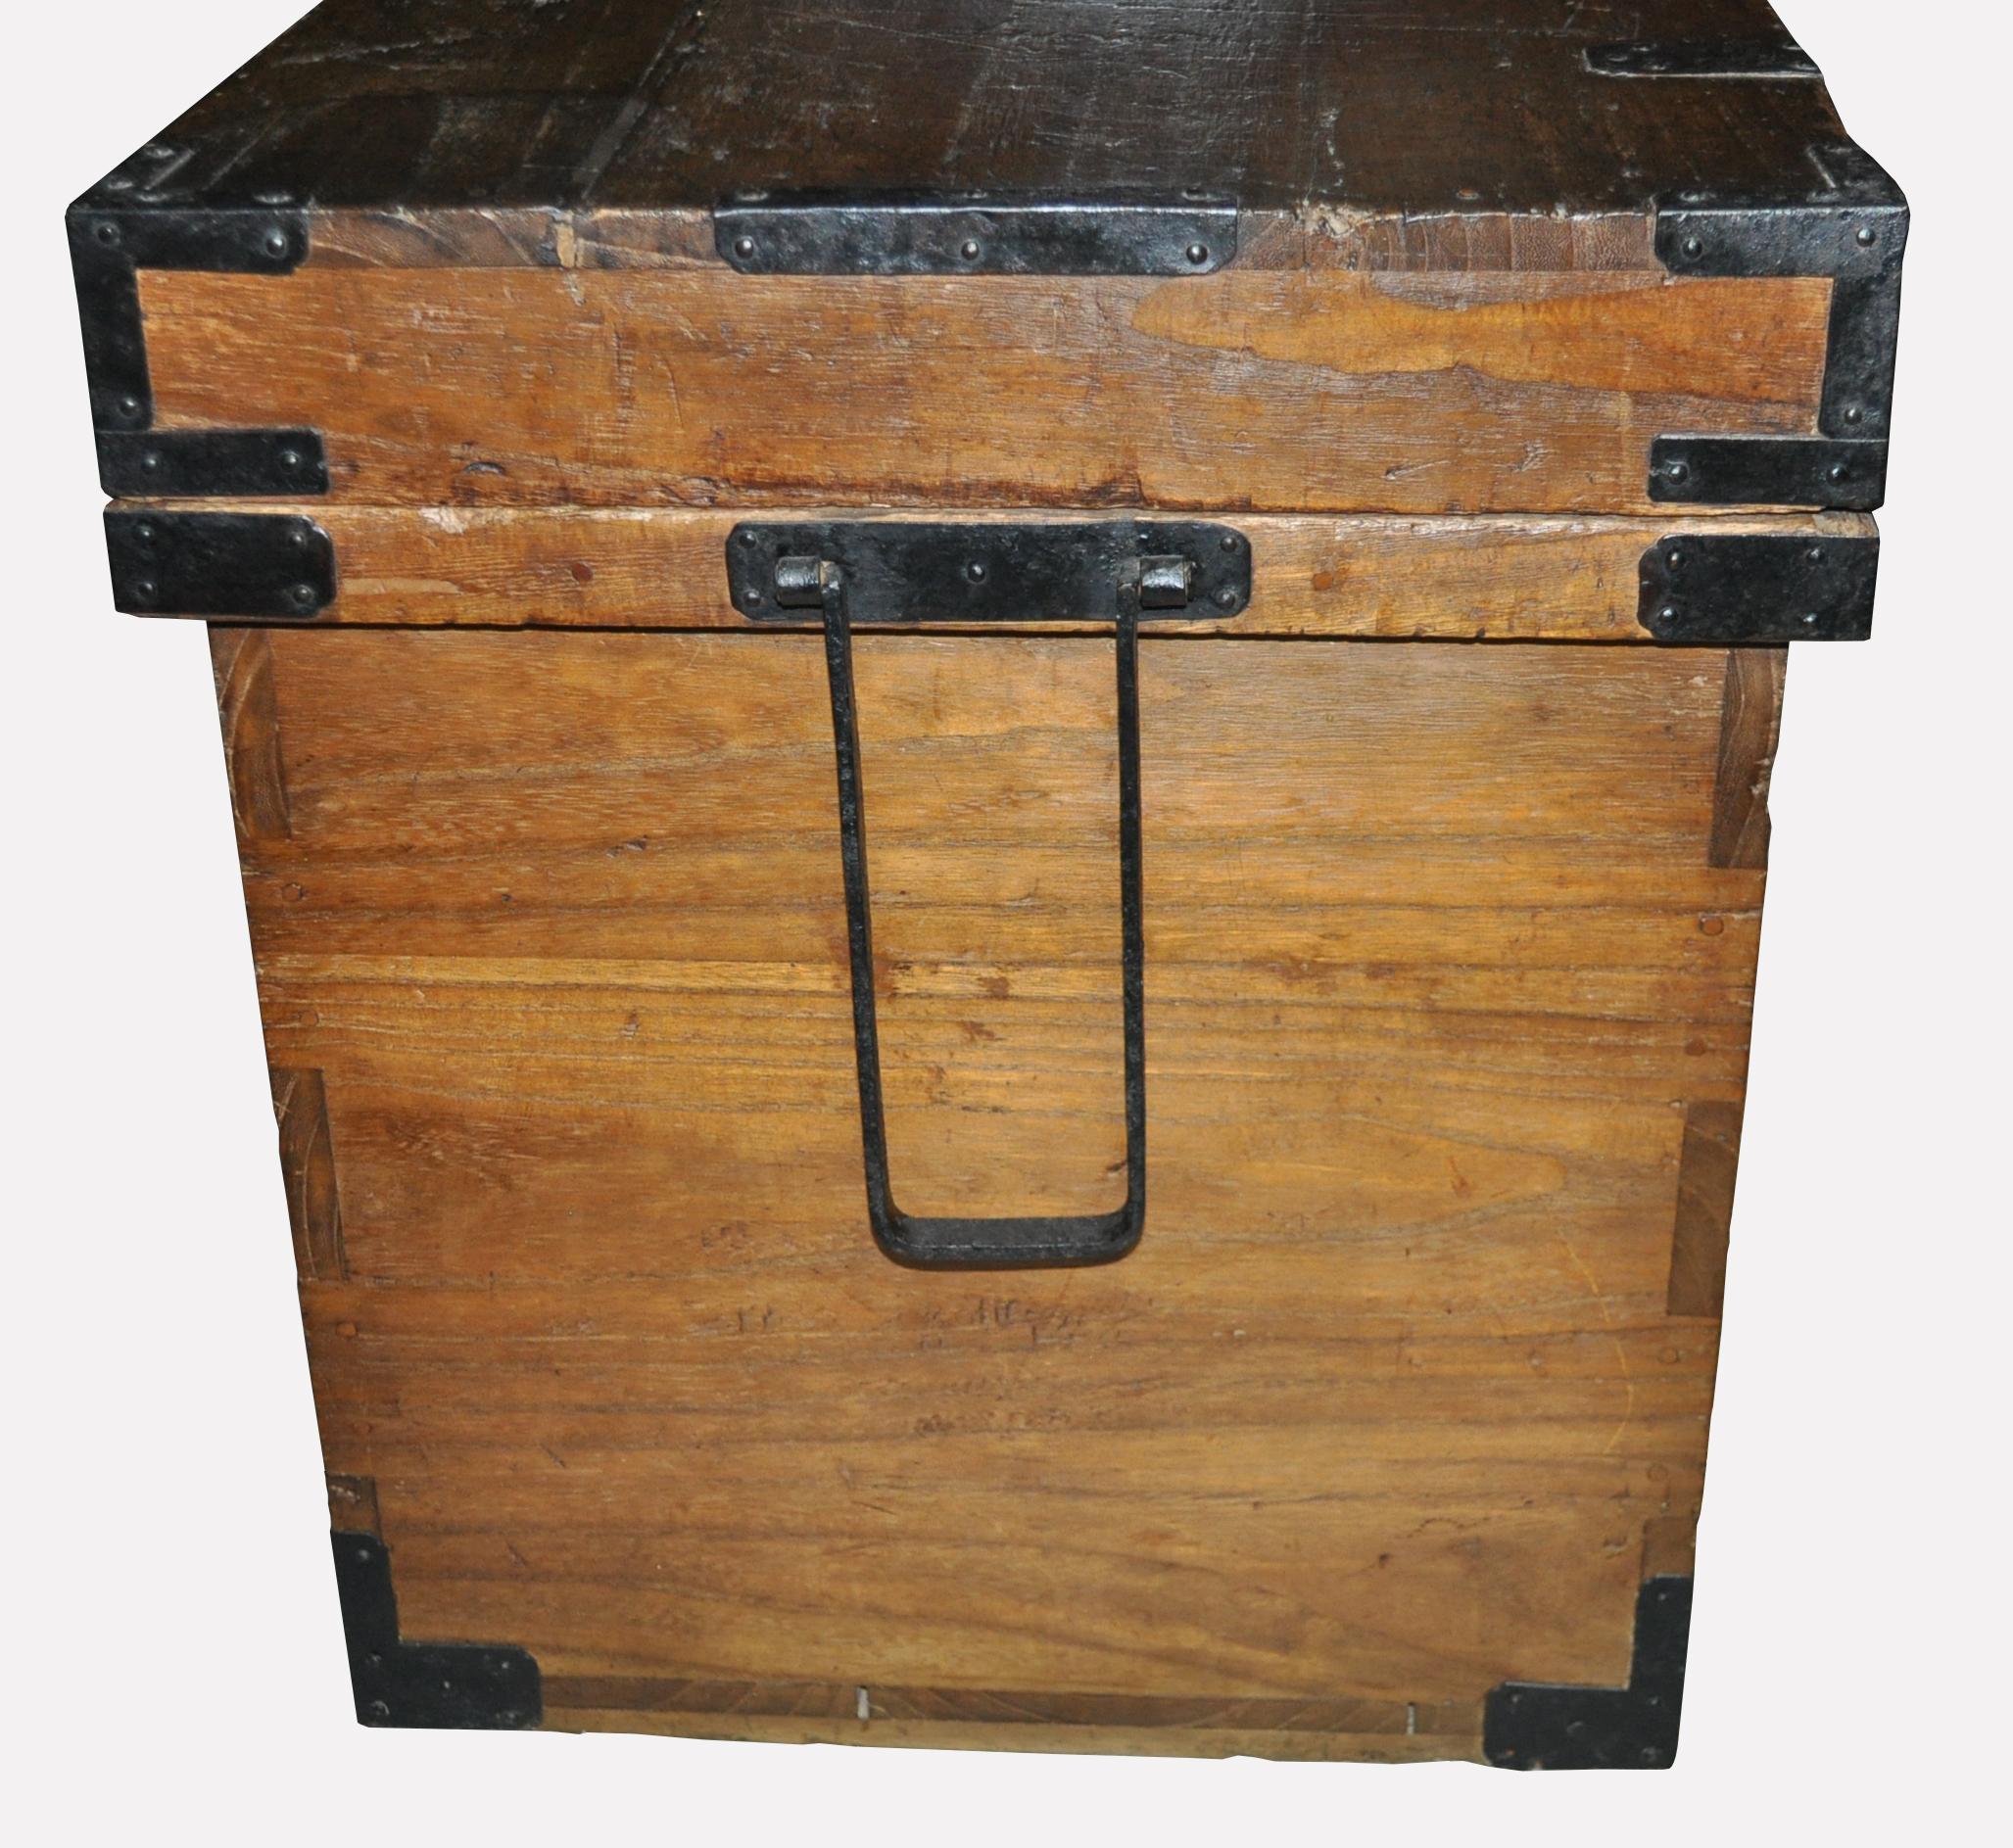 A most auspicious antique Japanese money chest of old kiri wood with mitered mortise and tenon construction and hand wrought iron fittings, including the original sao-toshi (suspending handles). Bold calligraphic characters on the back of the chest